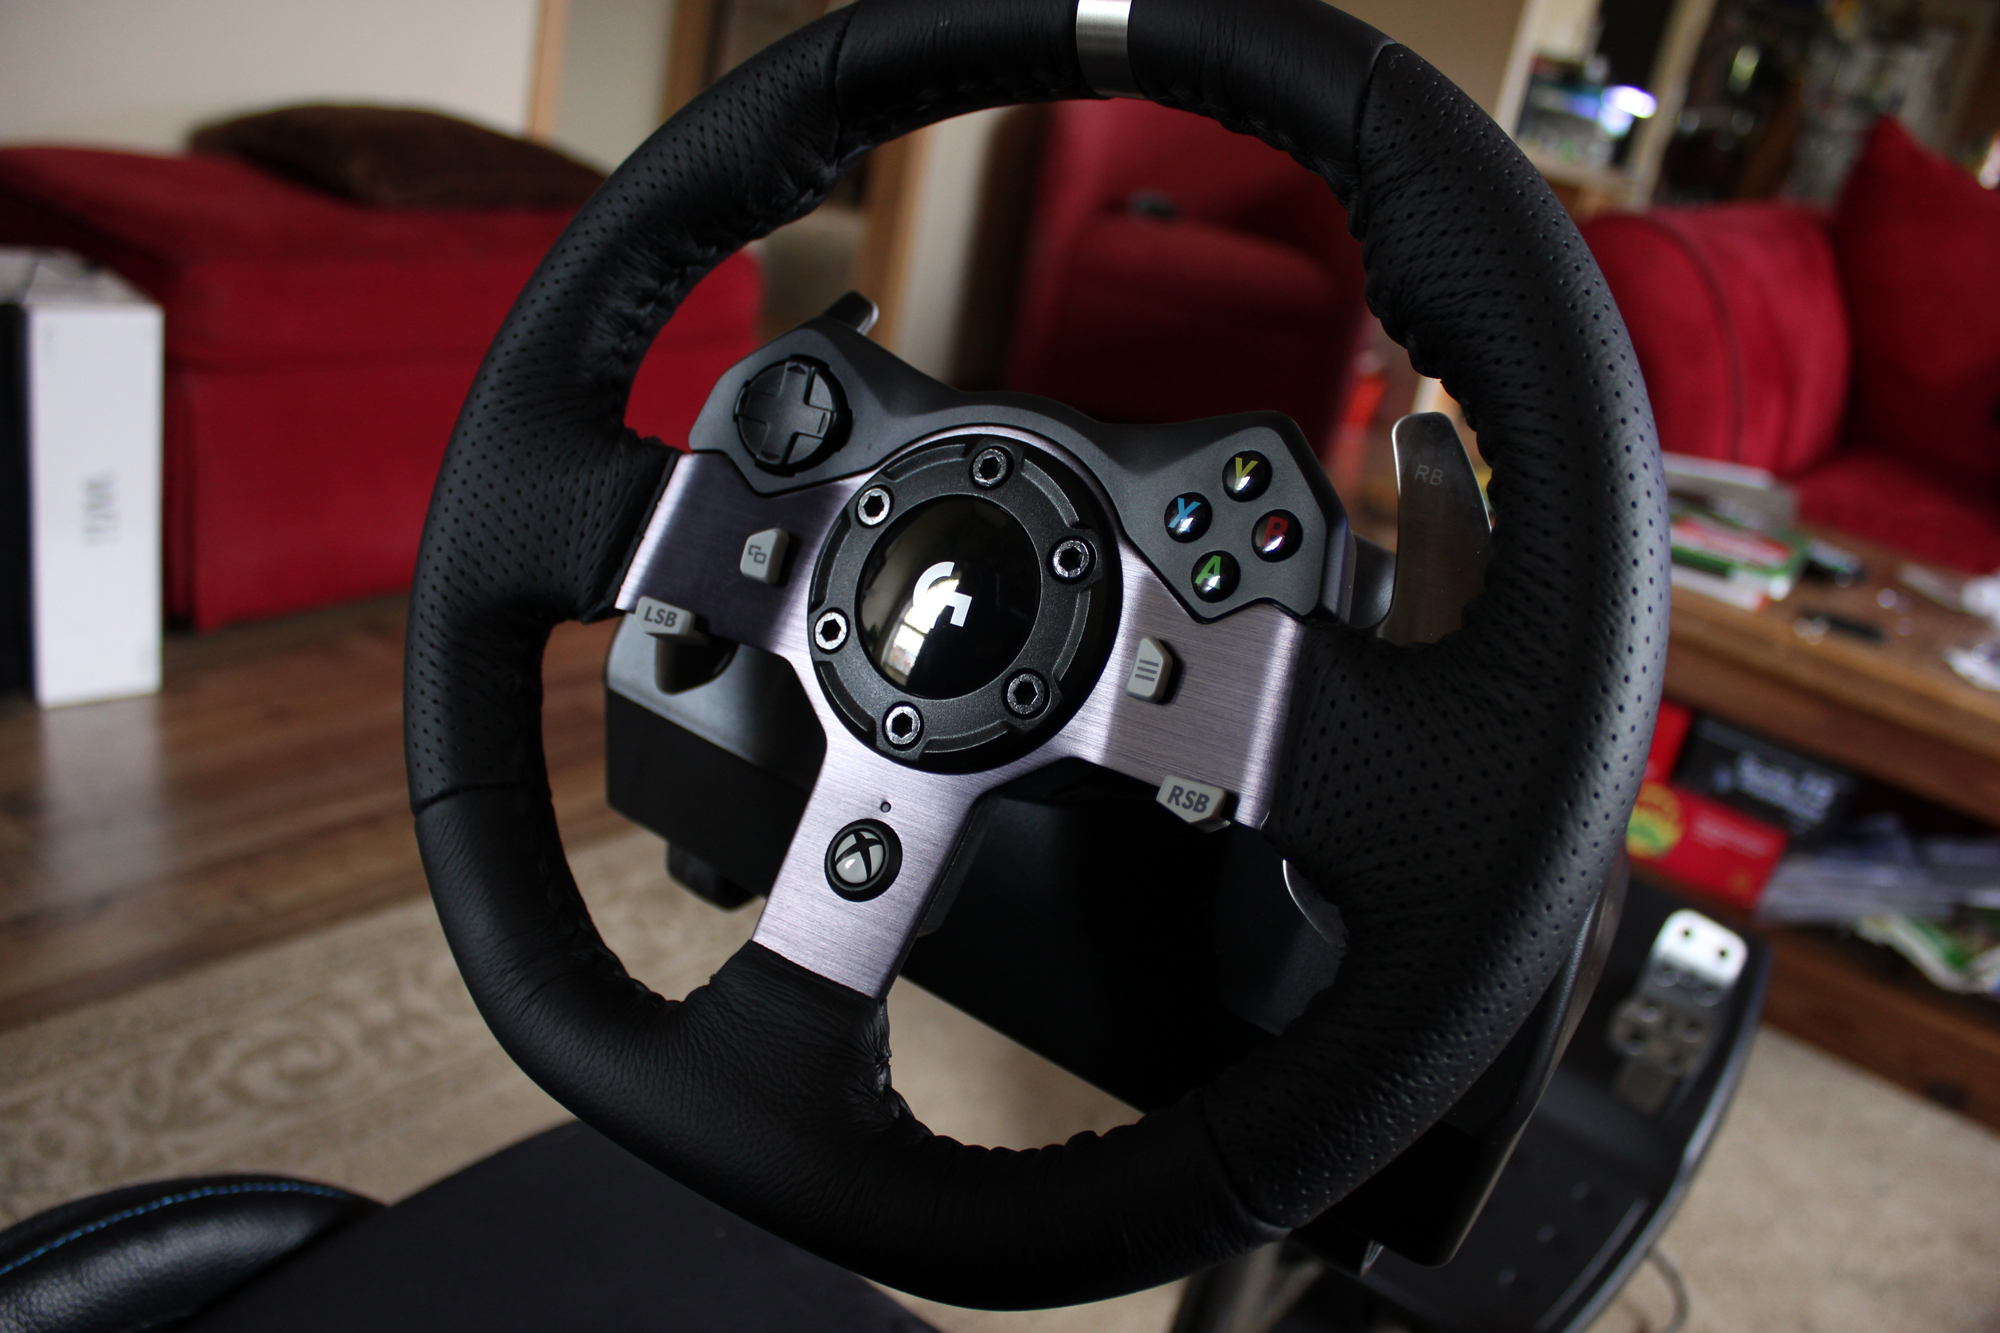 Logitech G920 Driving Force Xbox One Racing Wheel Review ...